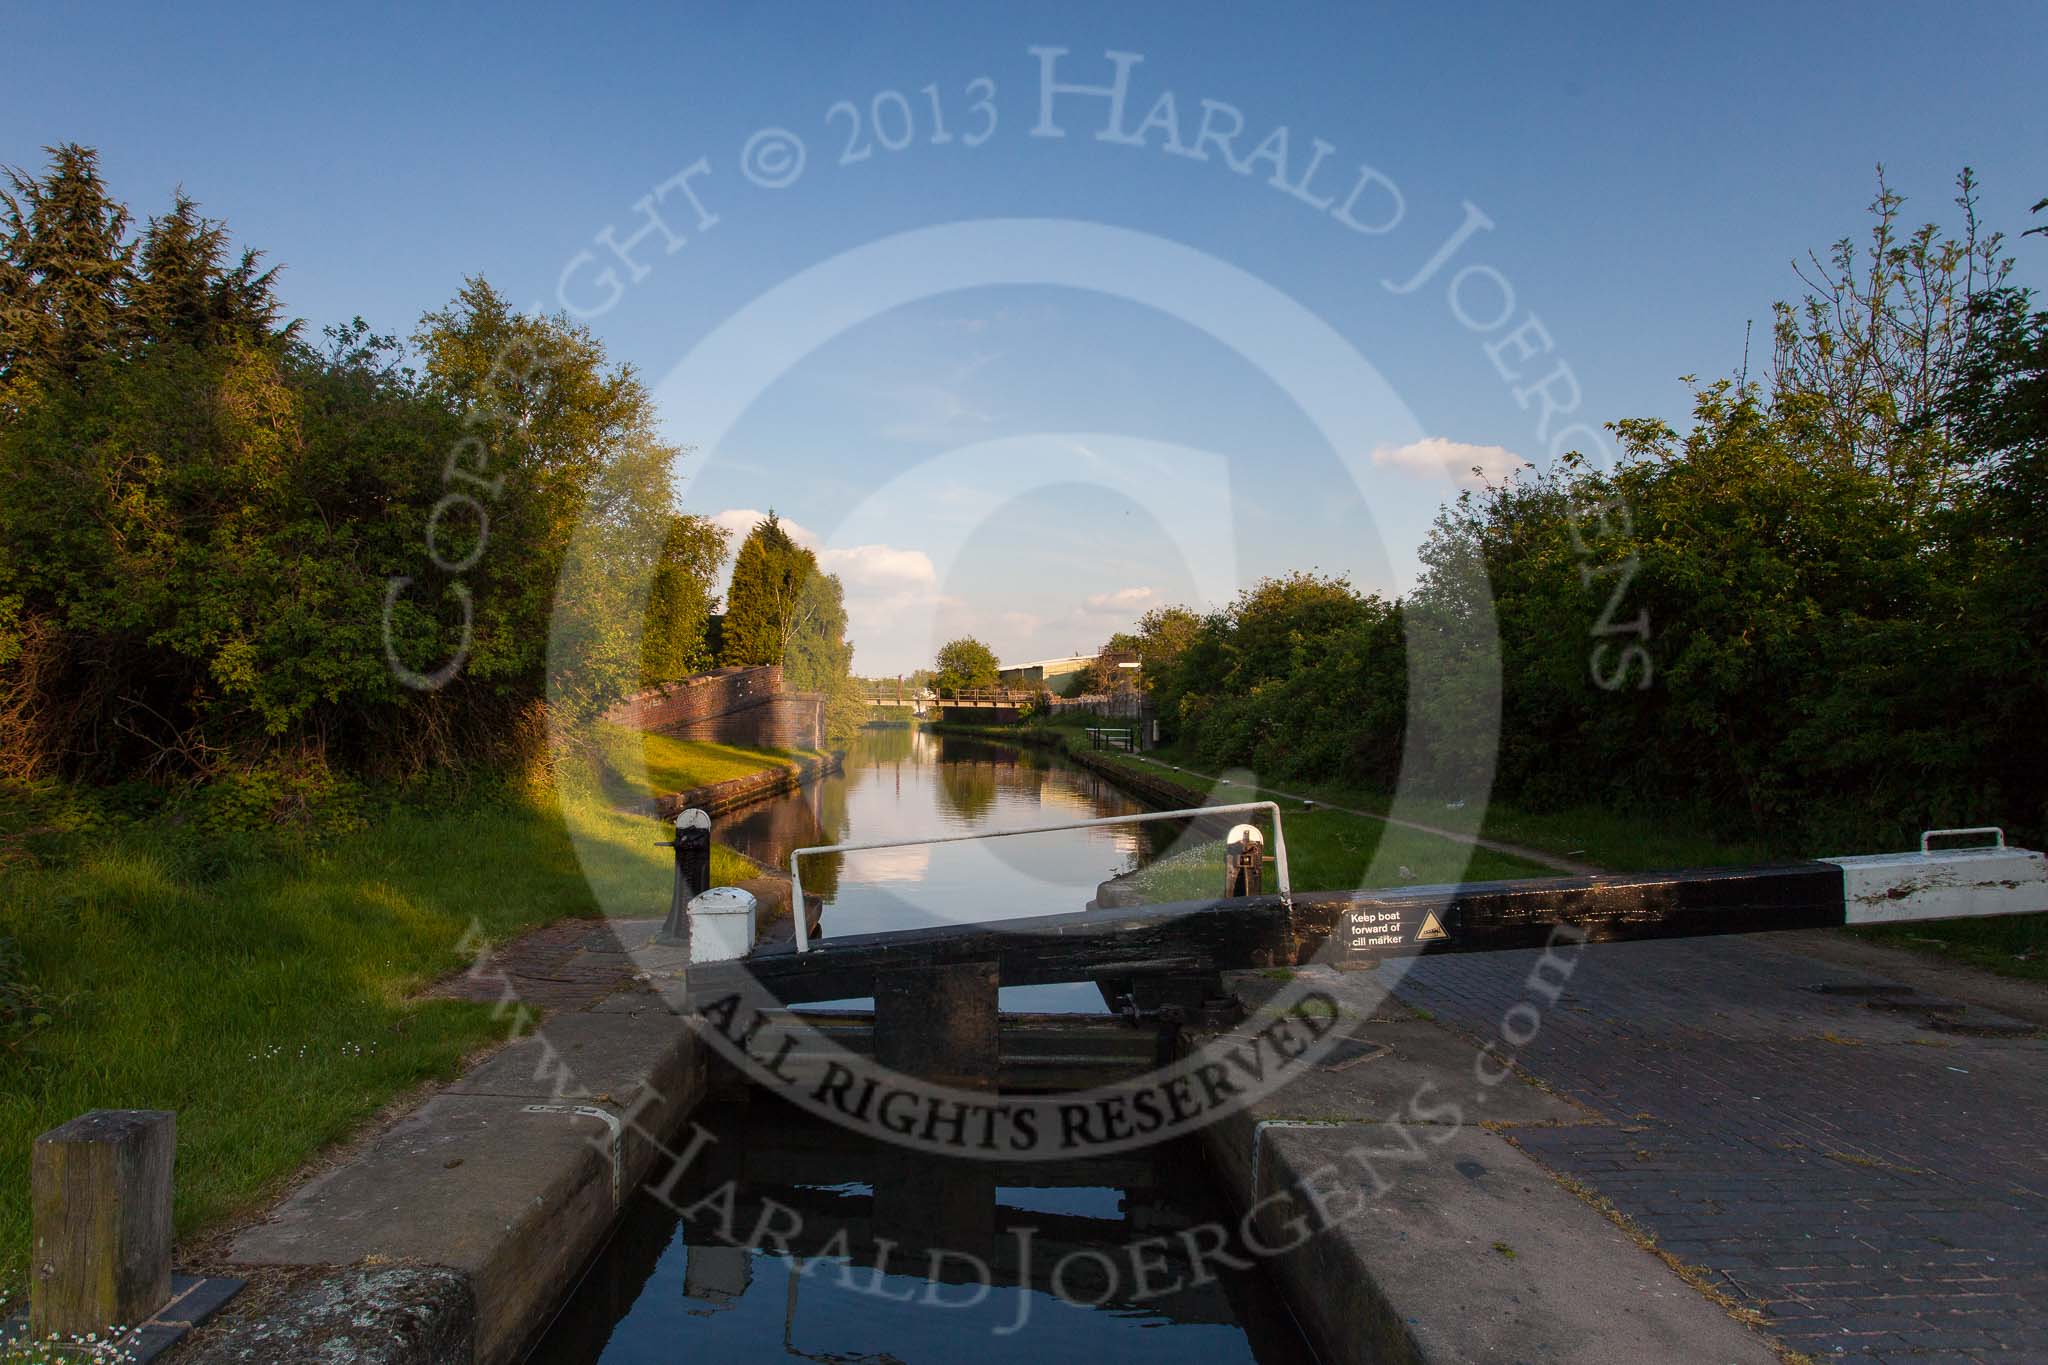 BCN Marathon Challenge 2013: Ryders Green Junction on the Wednesbury Old Canal, seen from Ryders Green Top Lock on the Walsall Canal..
Birmingham Canal Navigation,


United Kingdom,
on 25 May 2013 at 19:16, image #304